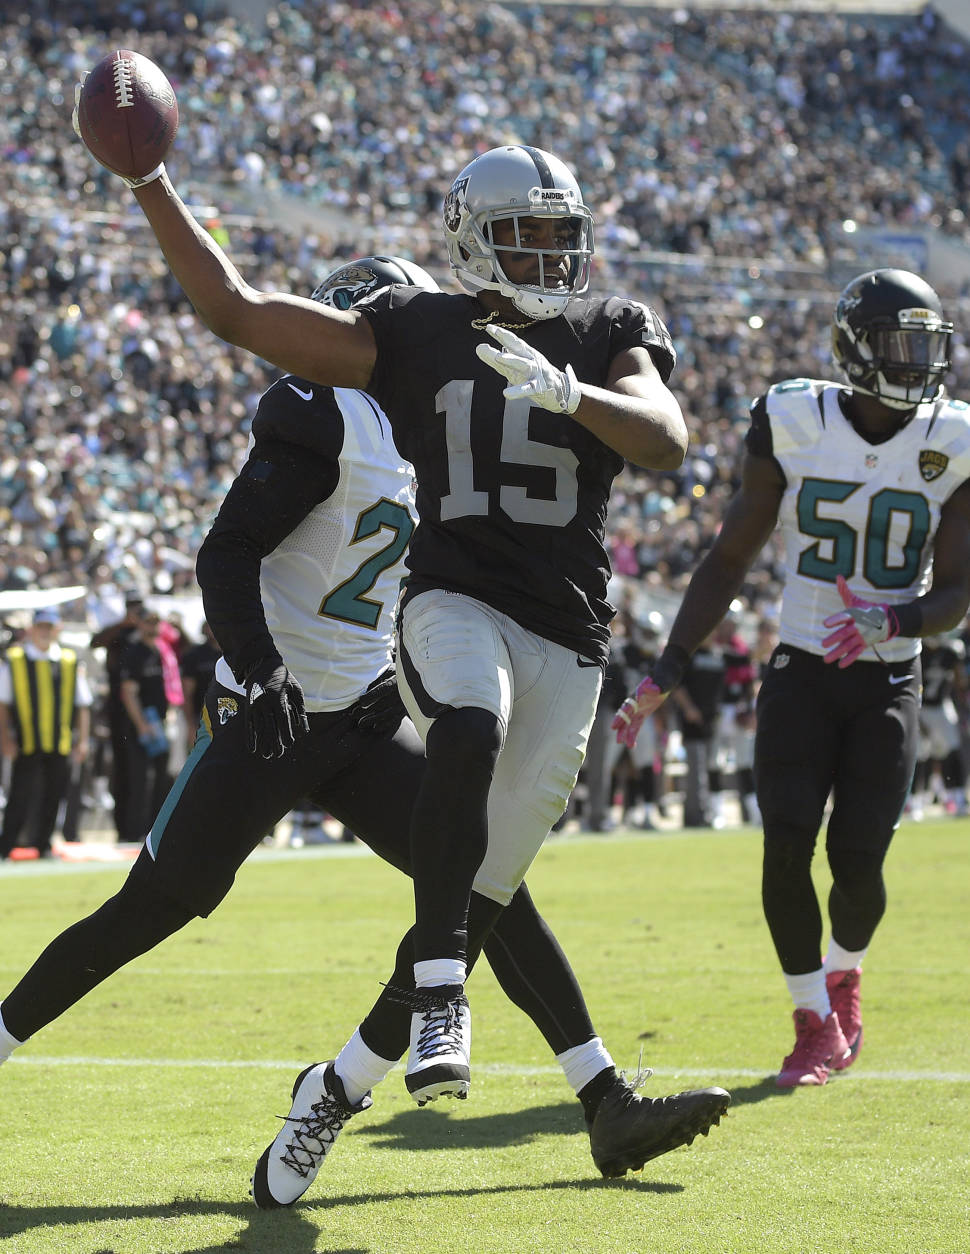 Raiders wide receiver Michael Crabtree (15) celebrates his two-yard touchdown reception in front of Jacksonville Jaguars cornerback Prince Amukamara (21) and outside linebacker Telvin Smith (50) during the second quarter of an NFL football game Sunday, Oct. 23, 2016, in Jacksonville, Fla. (AP Photo/Phelan Ebenhack)